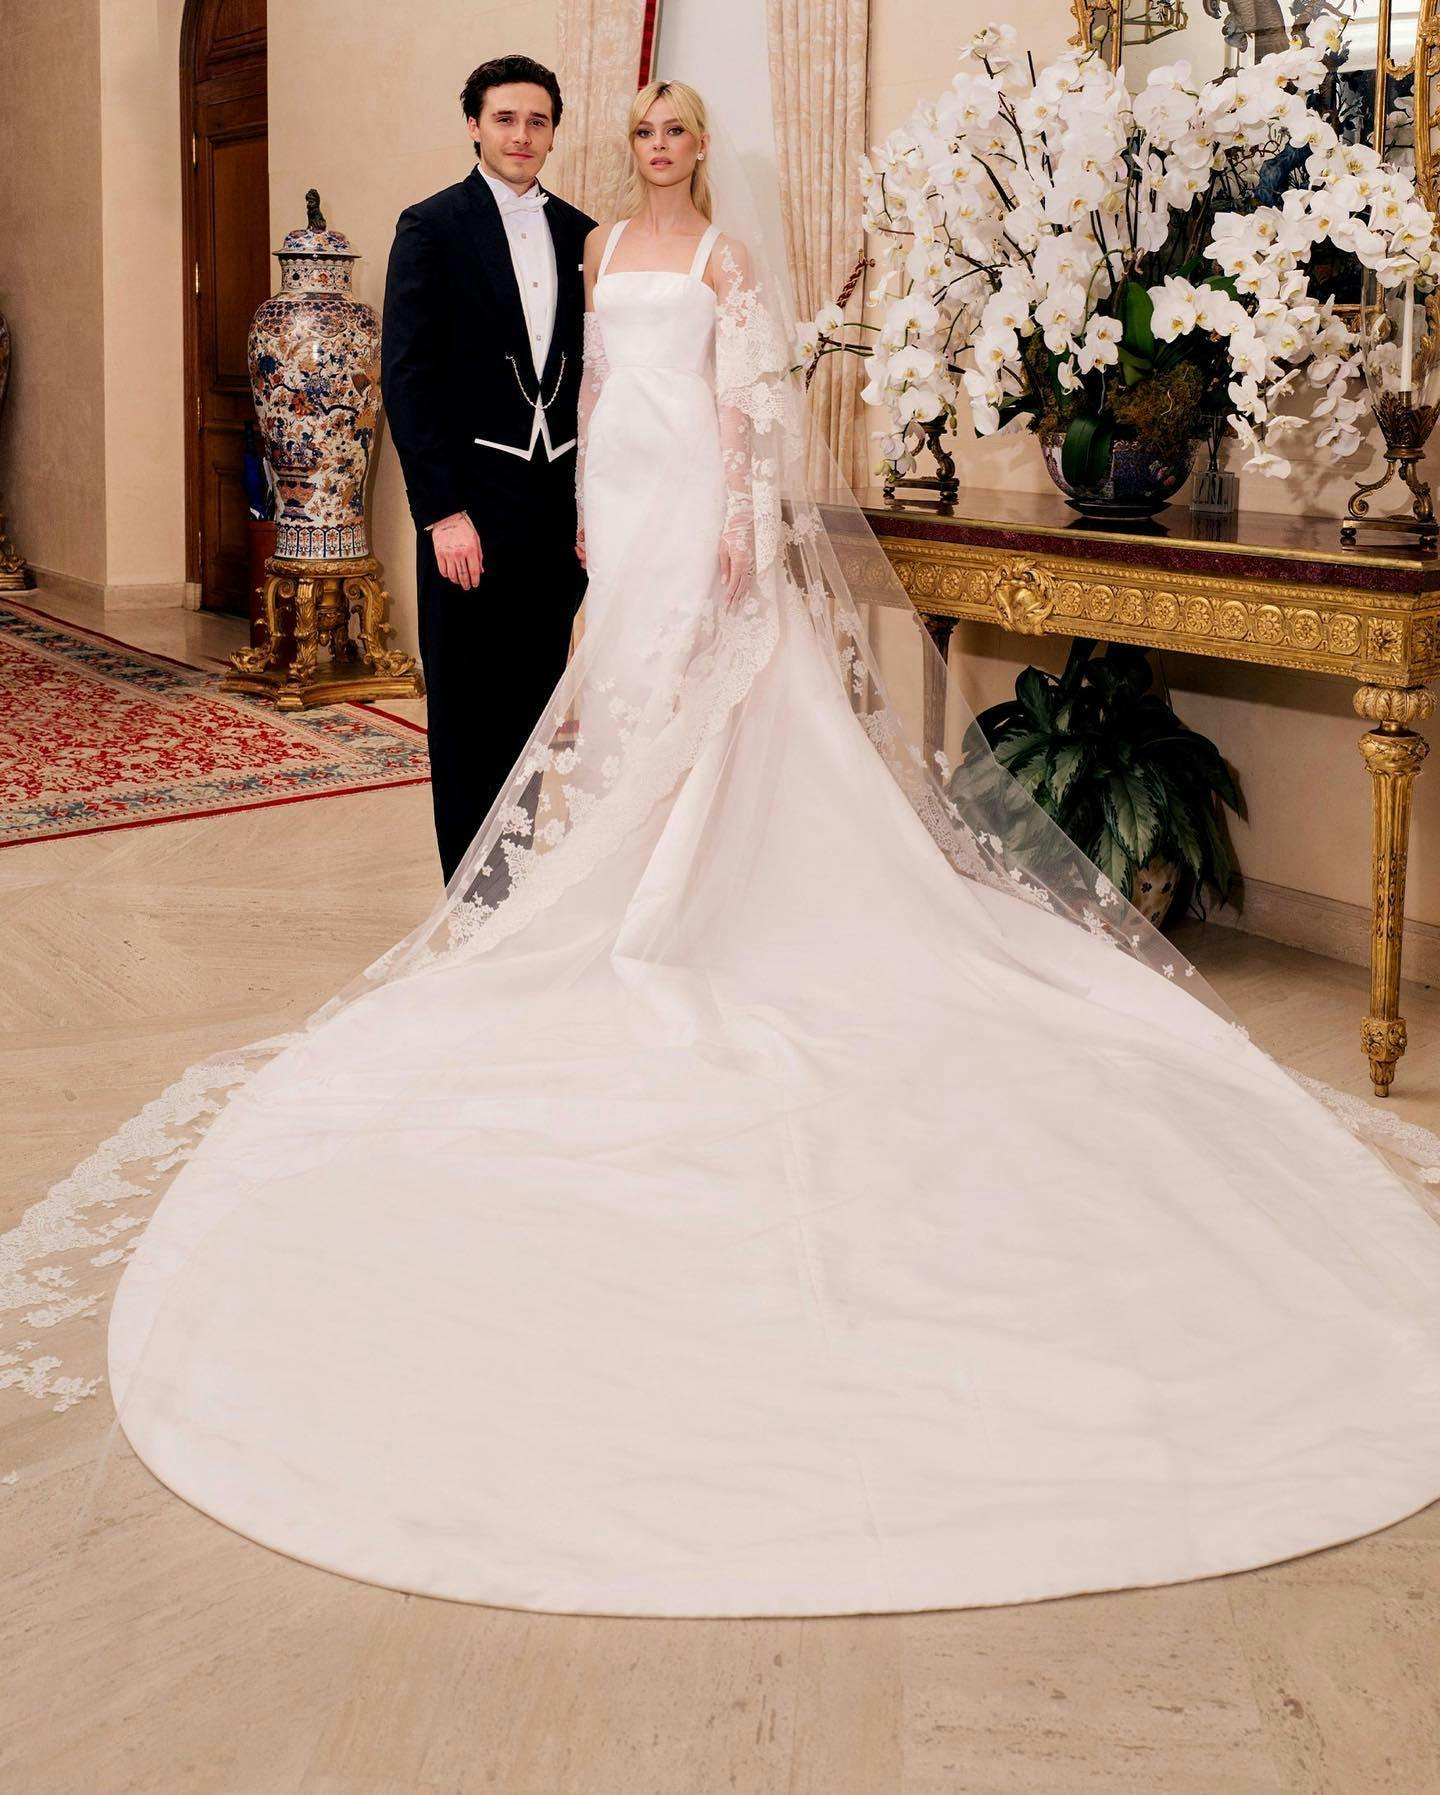 Nicola Peltz in her white gown and cascading veil and Brooklyn Beckham in his black tuxedo posing after their wedding ceremony with Nicola's dress train pooled in front..